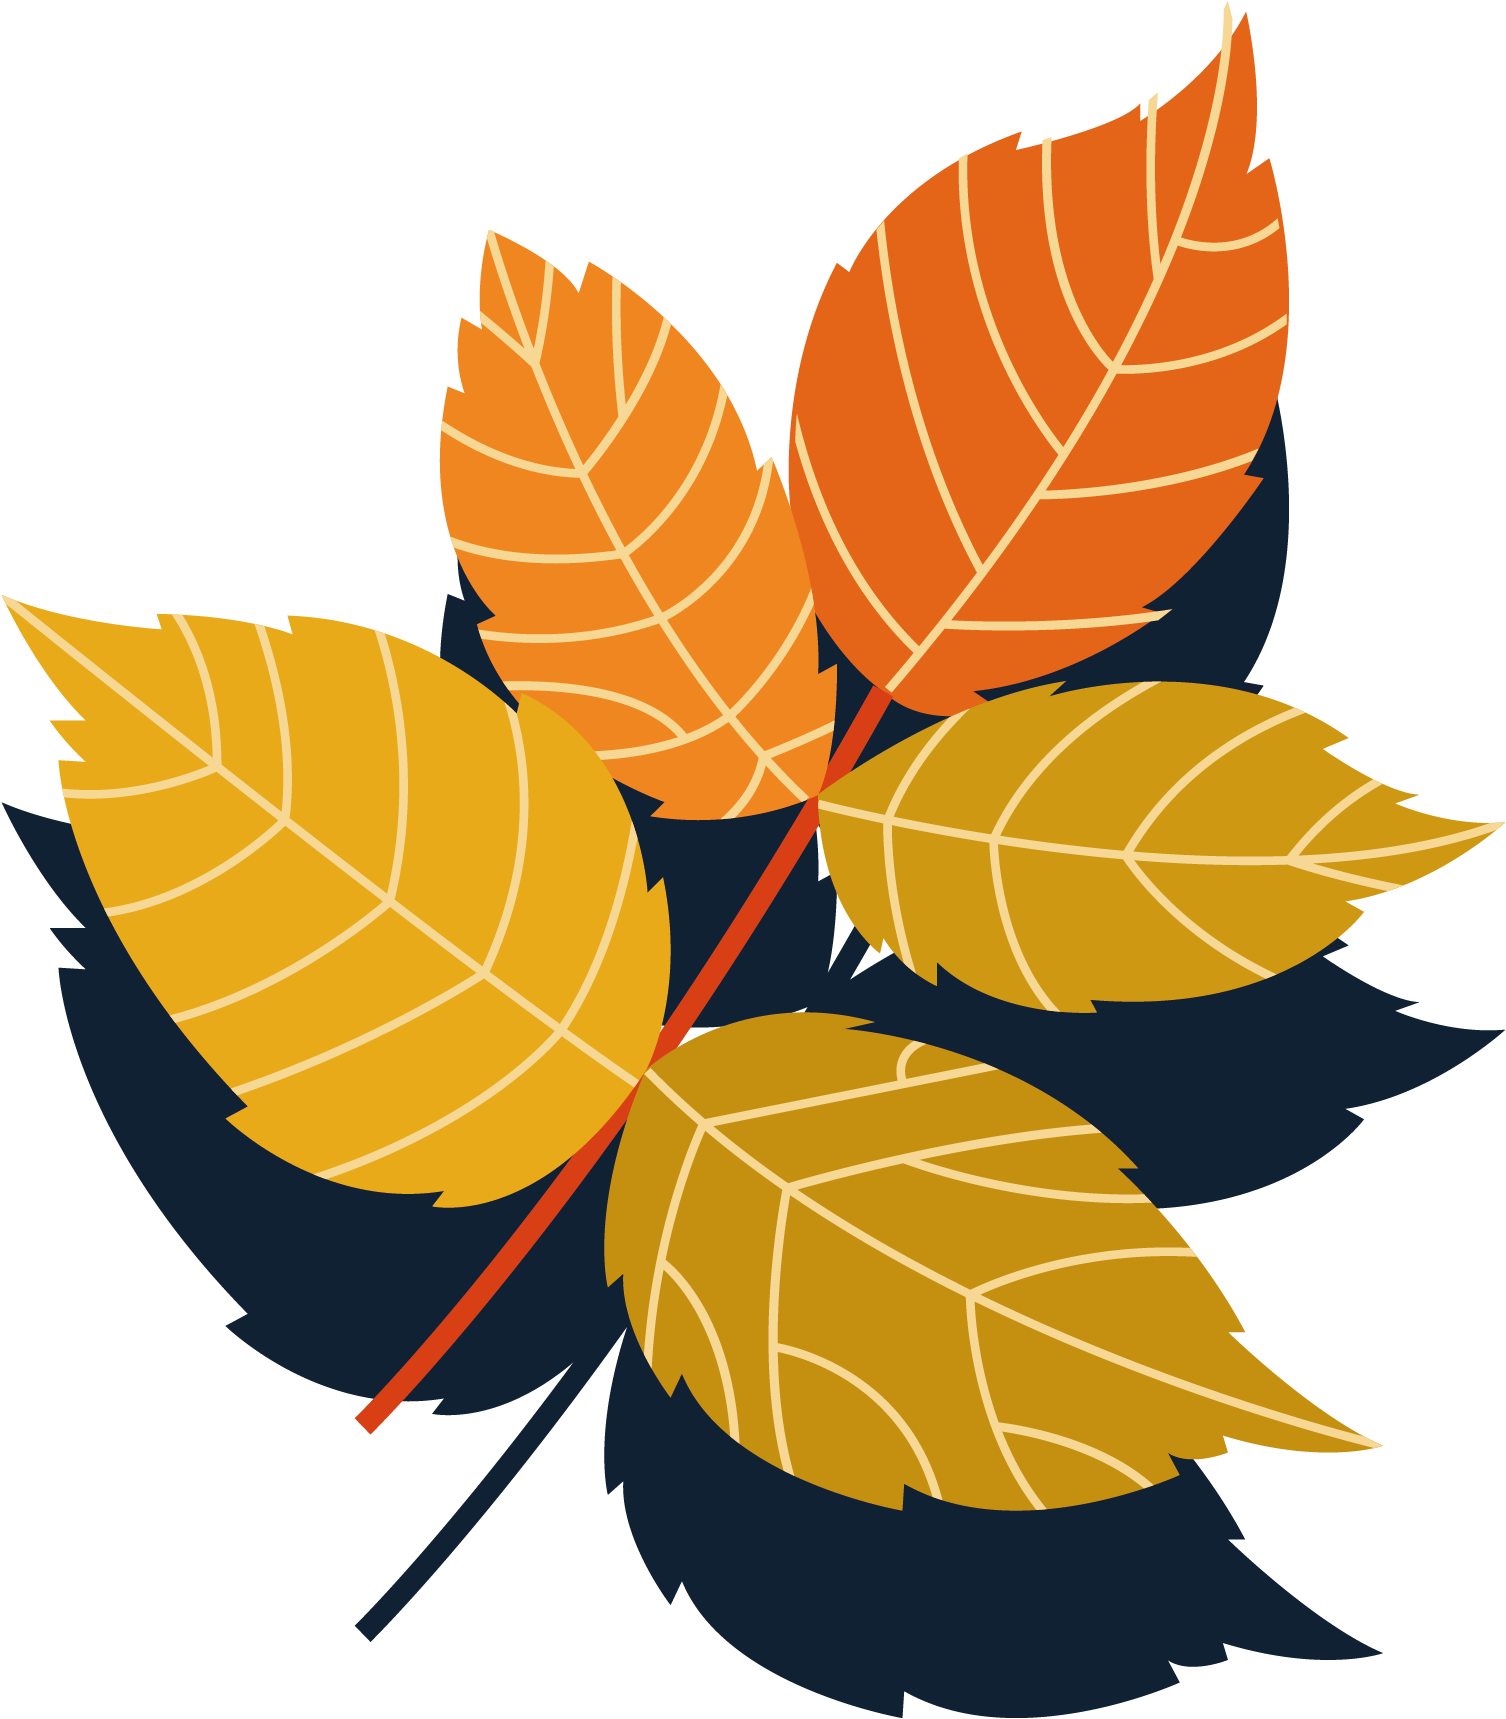 Autumn Leaves Collection Vector Material - Autumn Leaves Collection Vector Material (1536x1877)